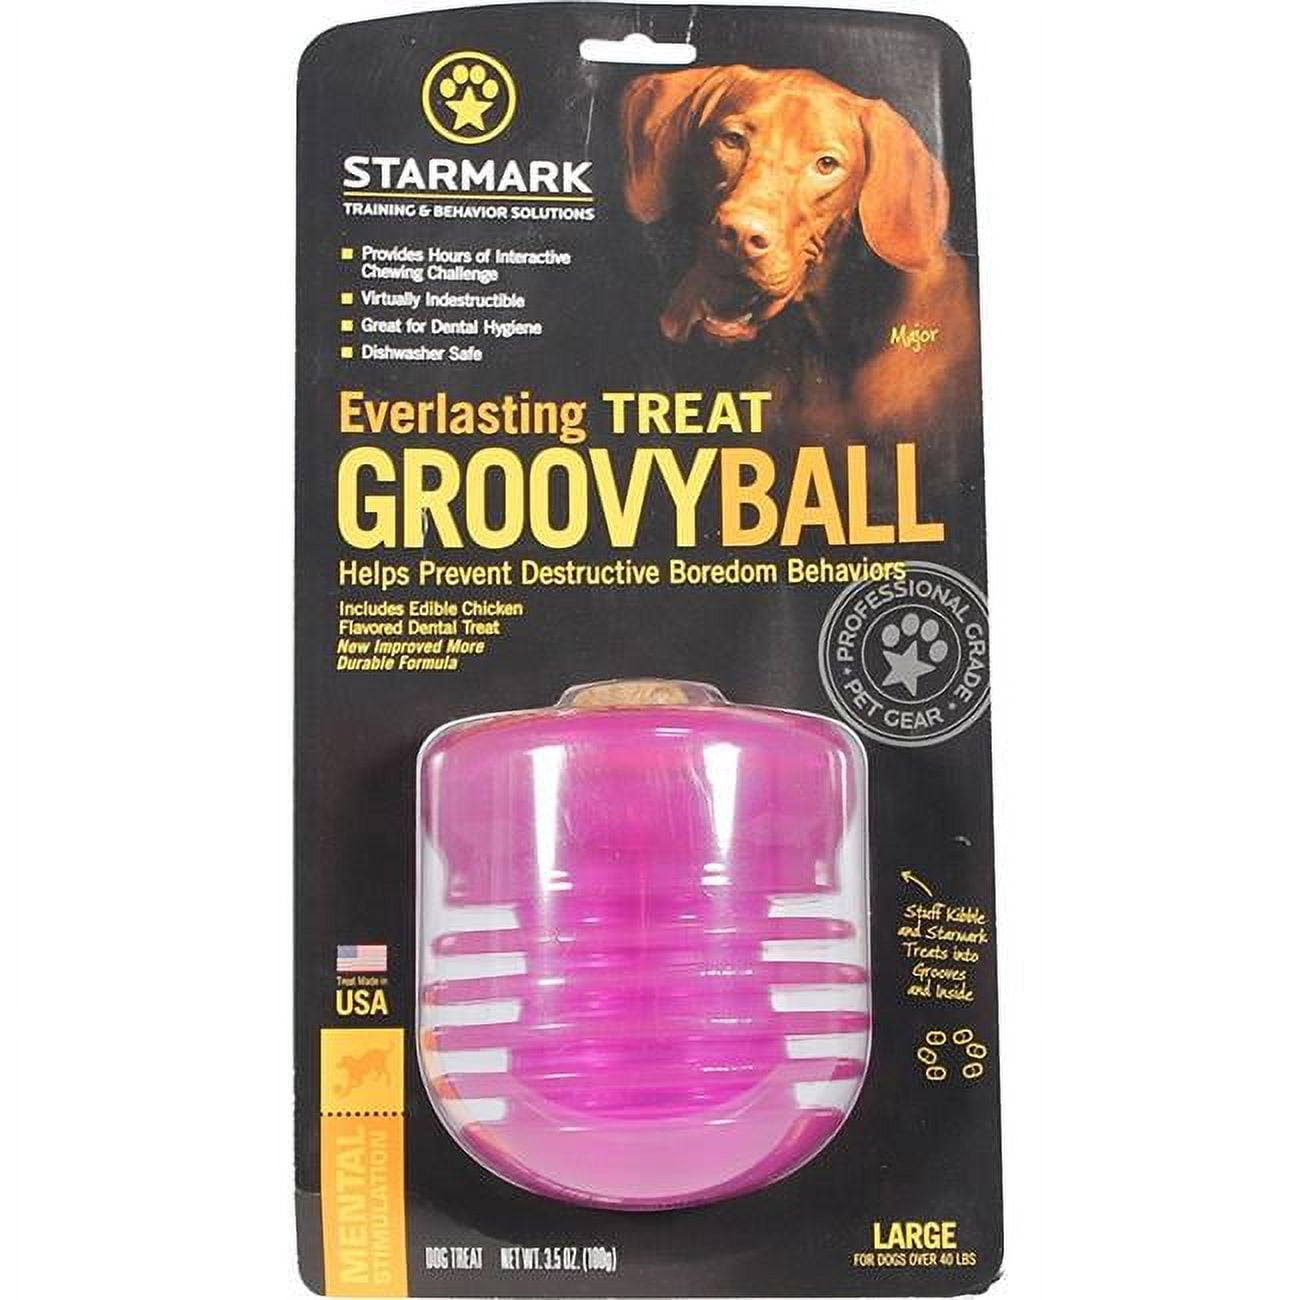 Spot Groovy Play Dog Toys from Ethical Products 